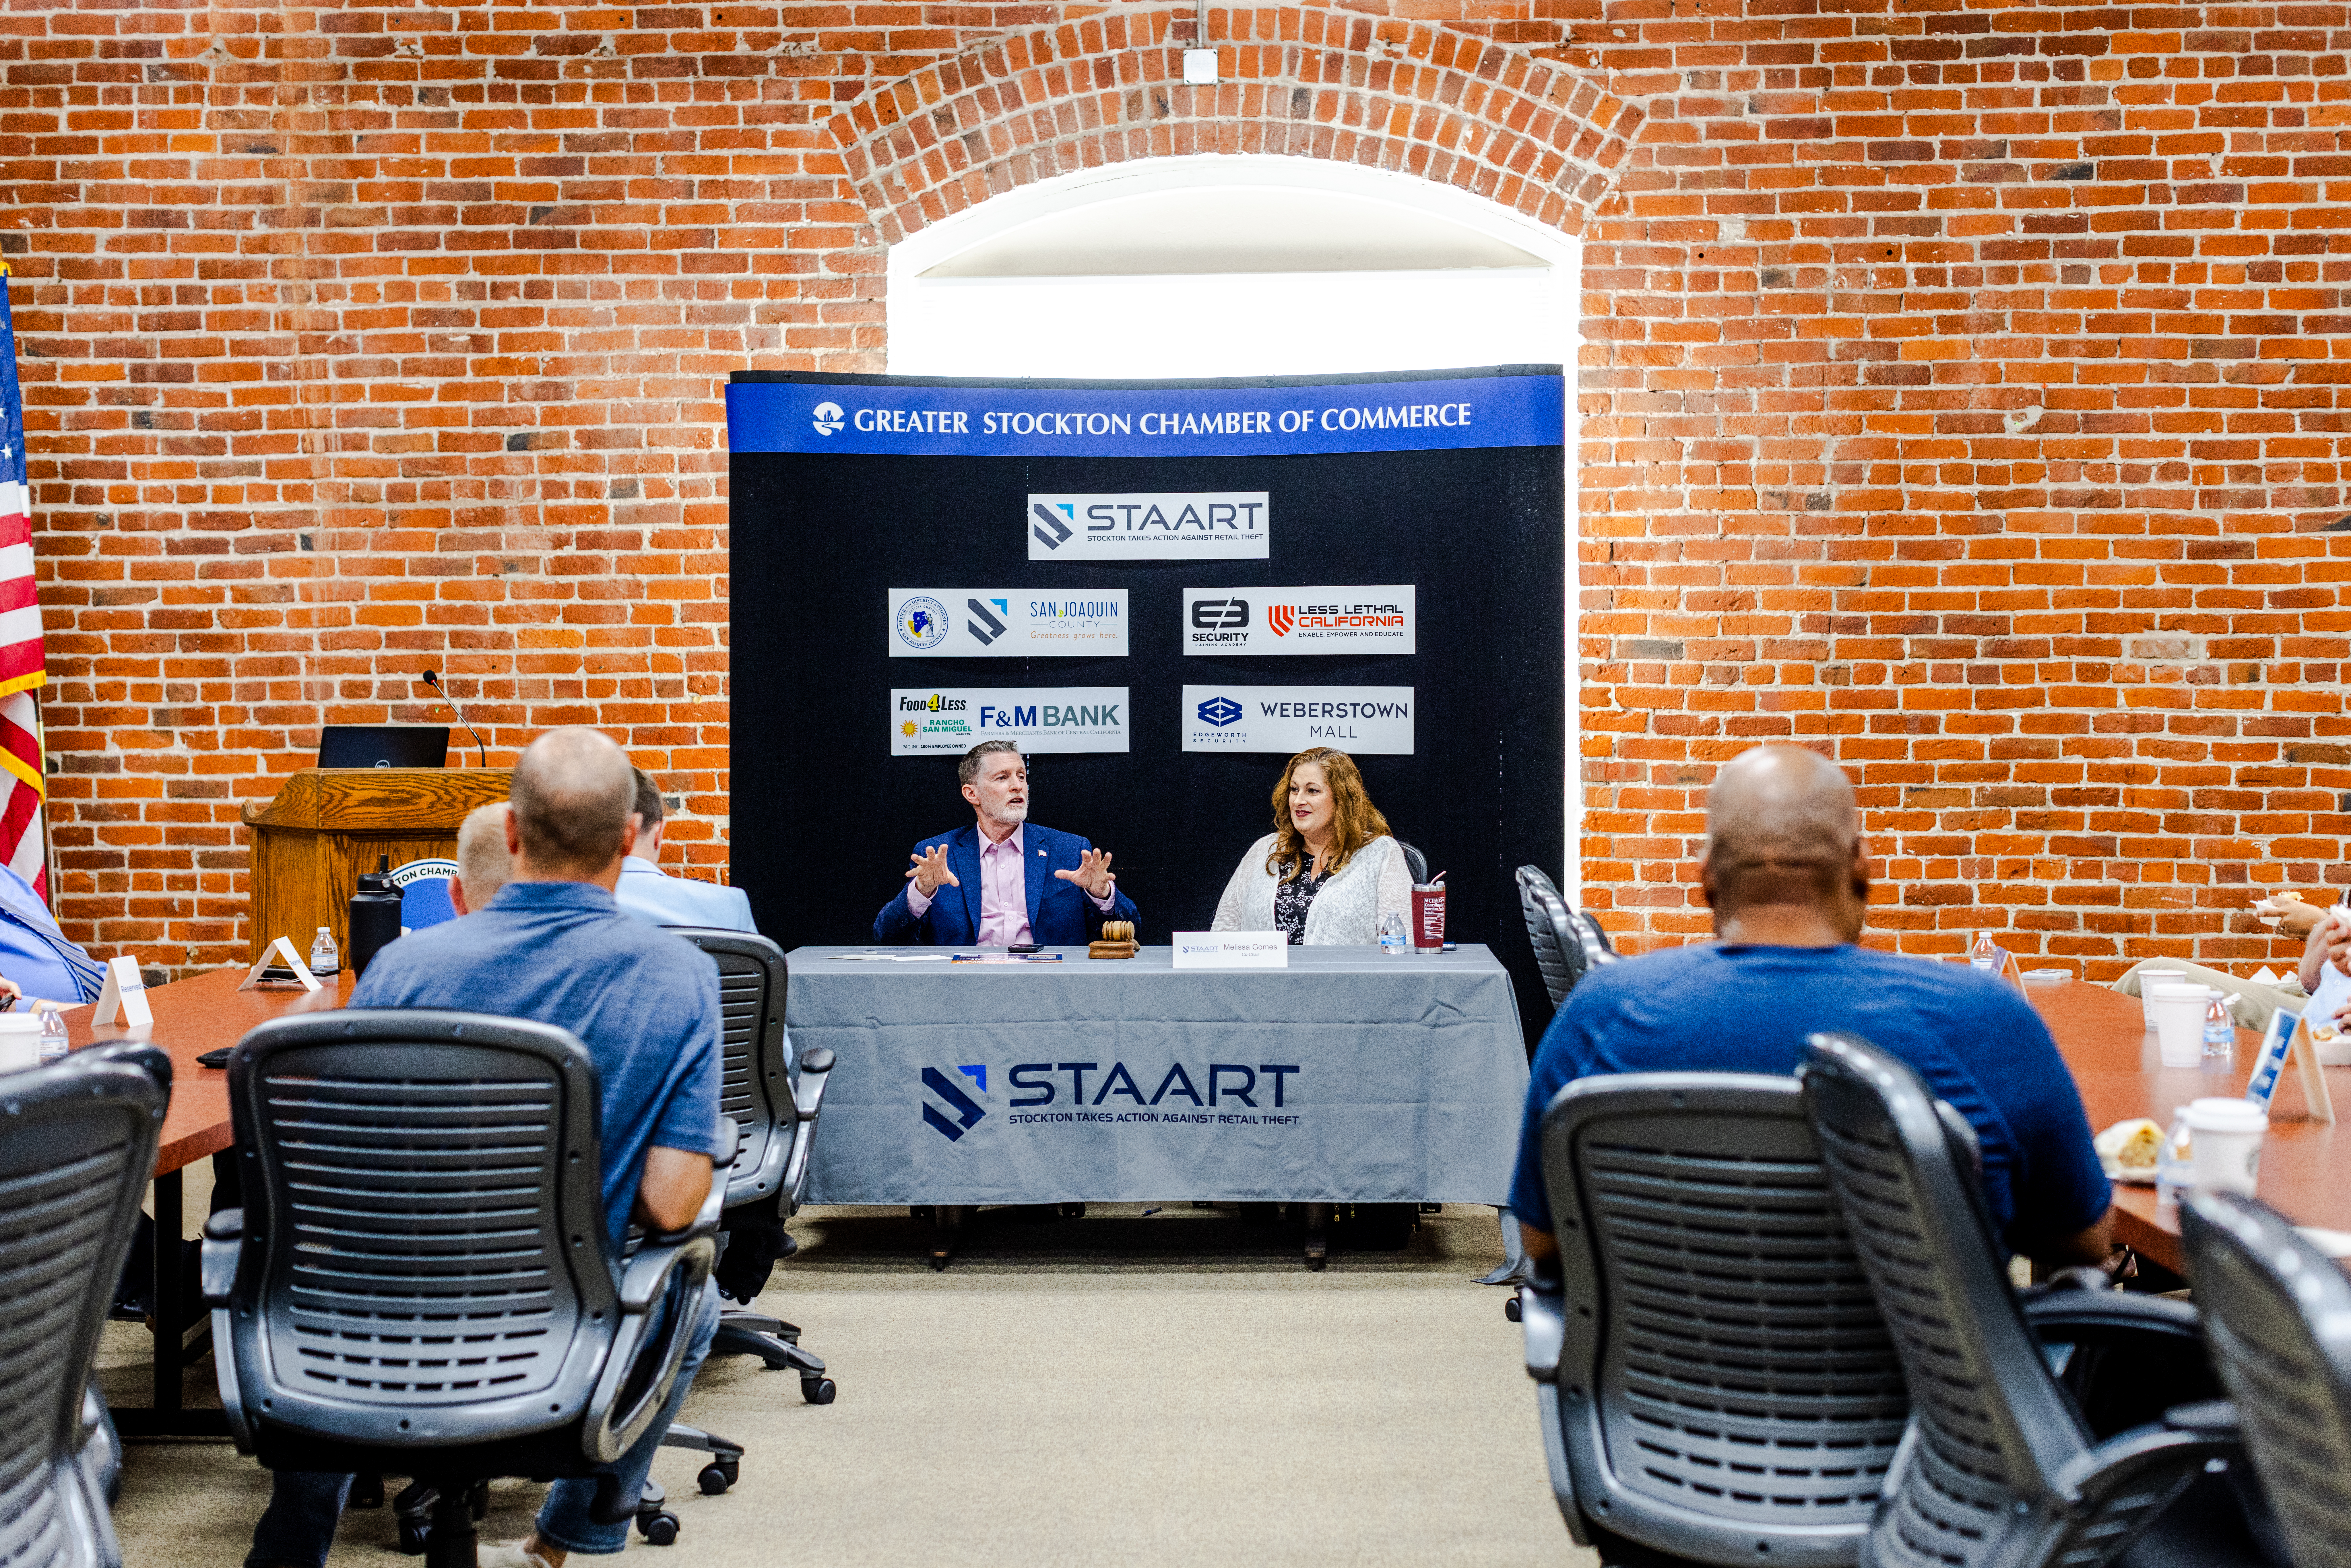 Frank J. Ferral, Chief Policy Officer of the Greater Stockton Chamber of Commerce, discusses the new STAART app, aimed at combating retail theft, during its unveiling at a press conference at 445 W. Weber Ave. Suite 220 in Stockton, CA.